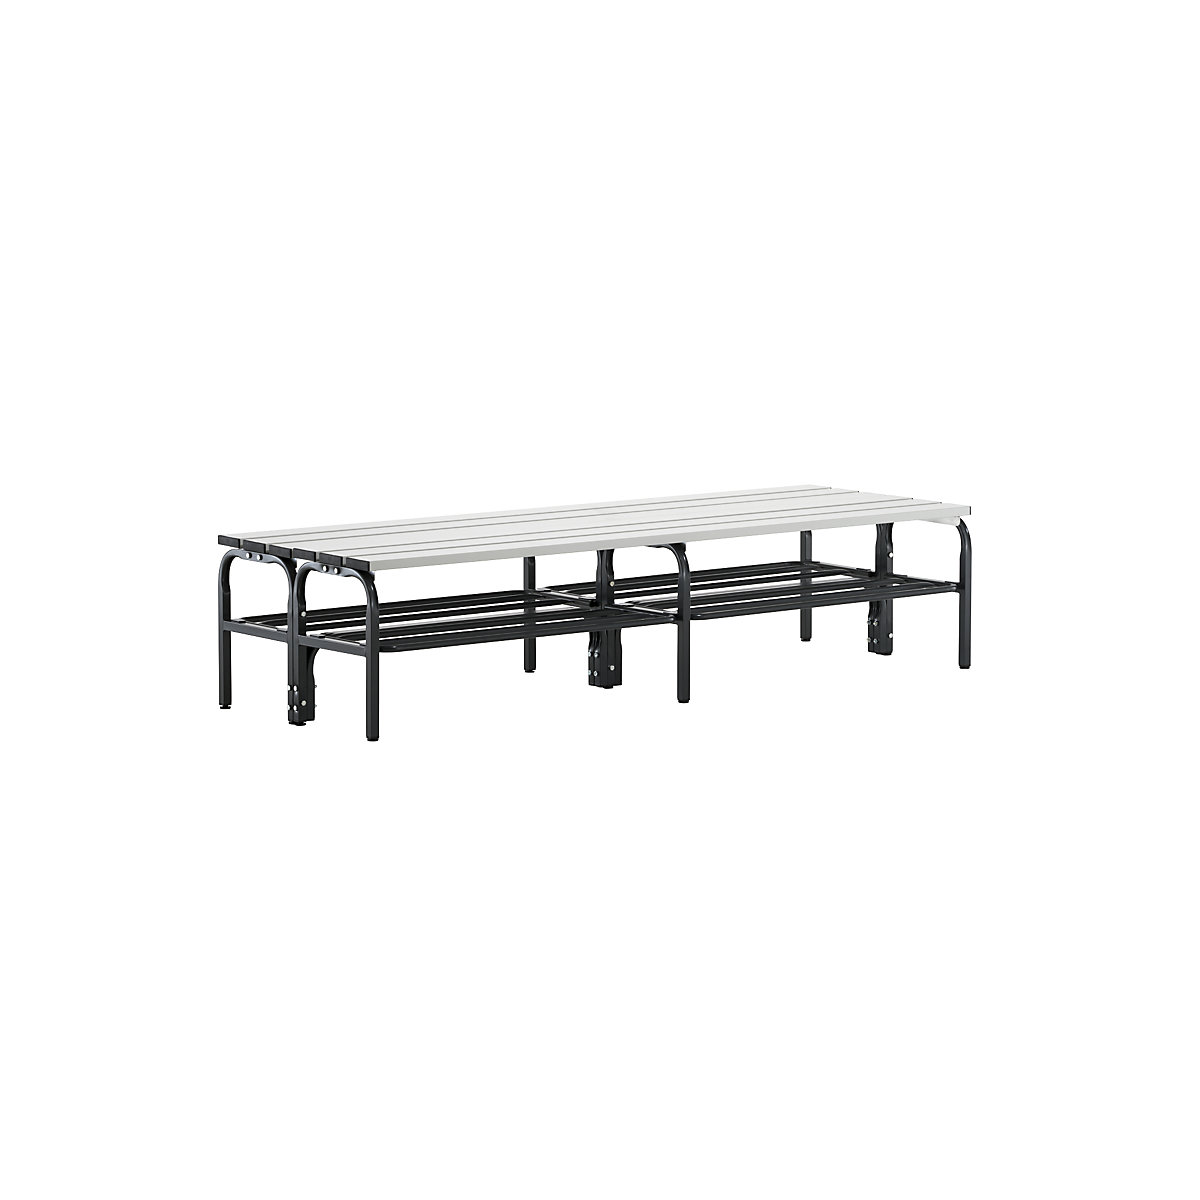 Cloakroom bench, double sided – Sypro, aluminium slats, stainless steel frame, length 1500 mm, with shoe rack-2